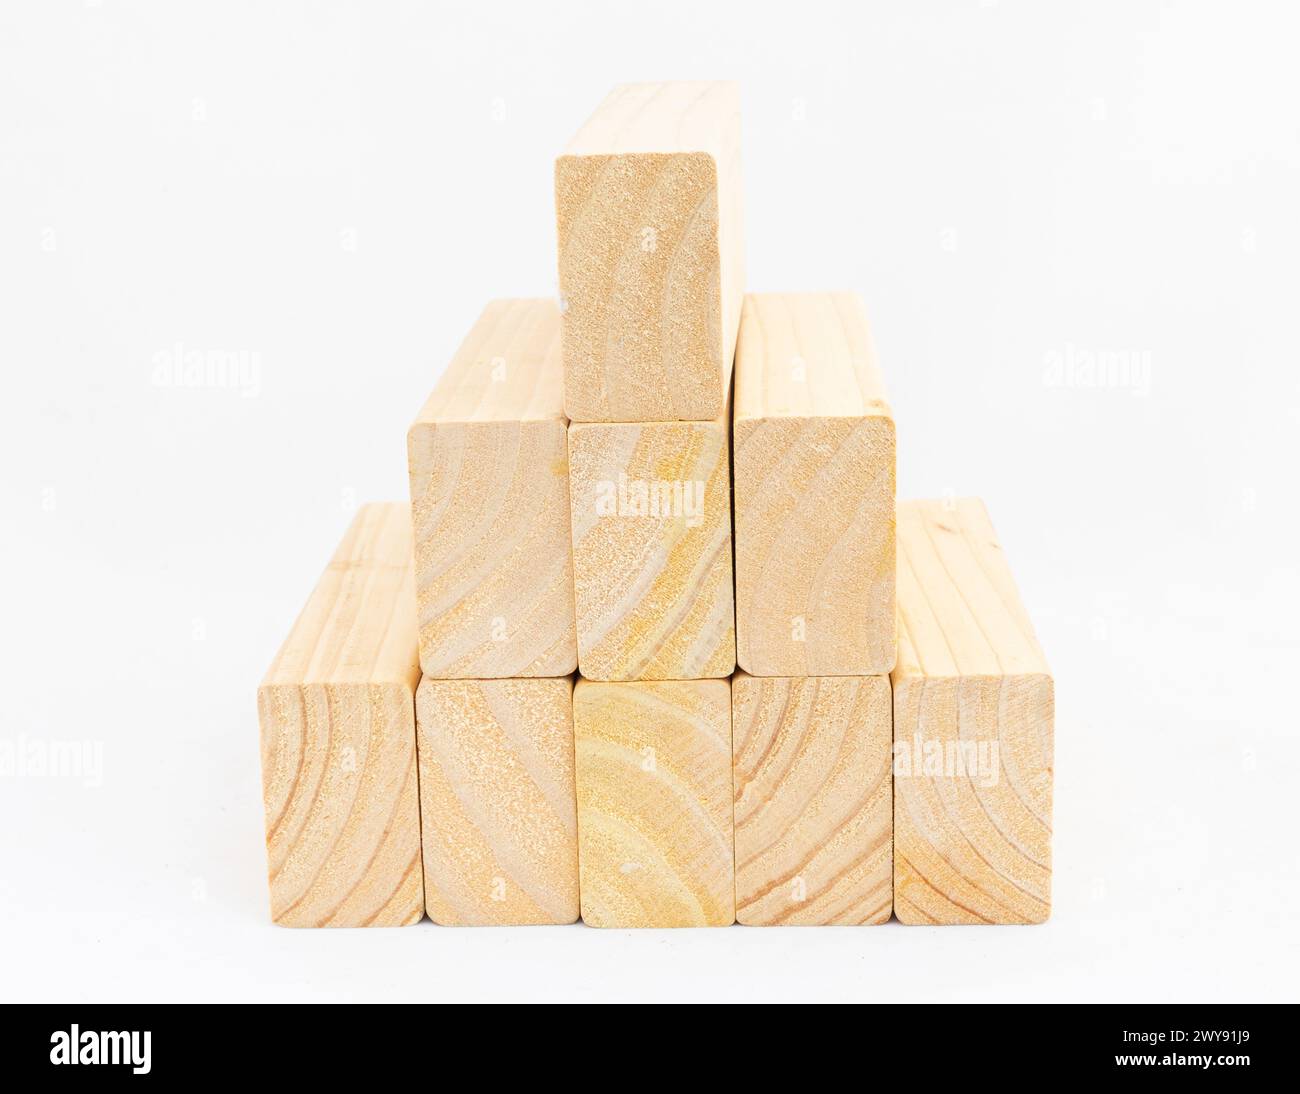 Stacked wood small planks in pyramid shape on white isolated background Stock Photo